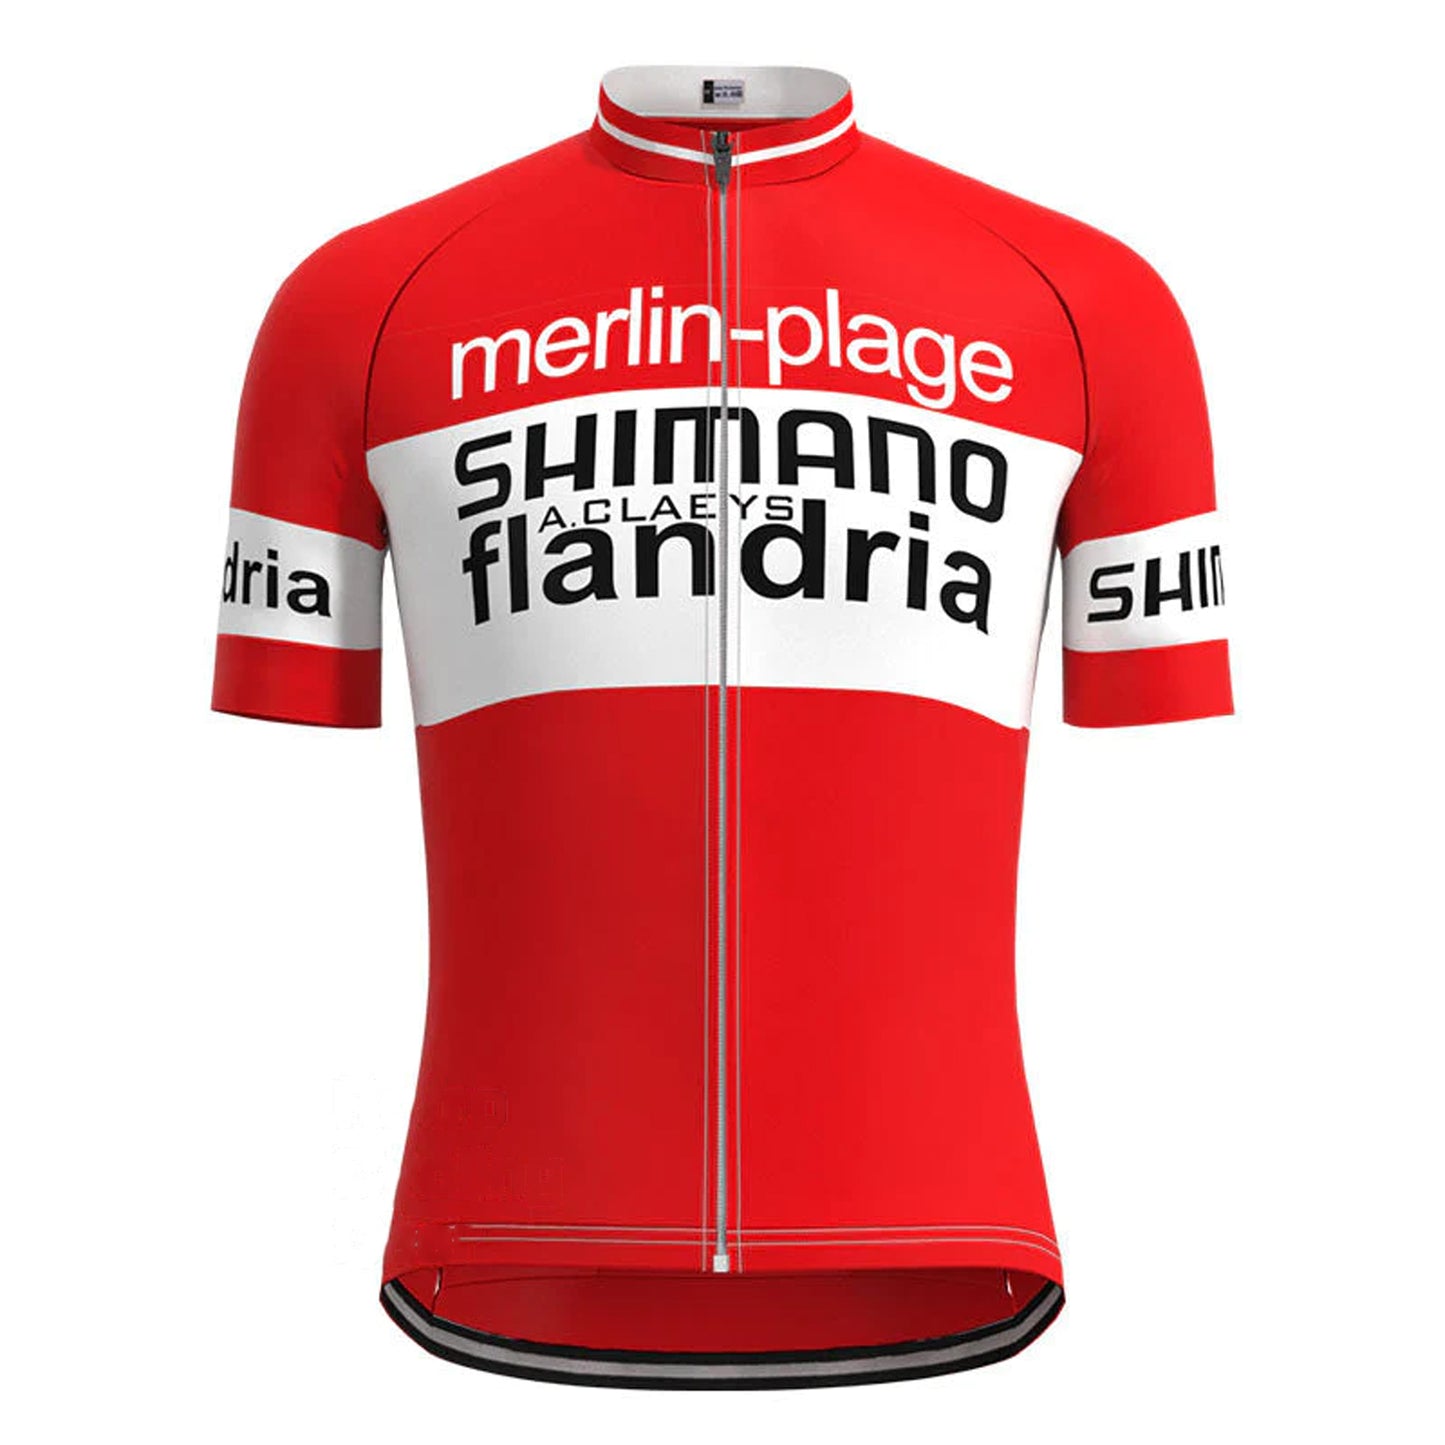 Shimano Flandria Red Vintage Short Sleeve Cycling Jersey Top